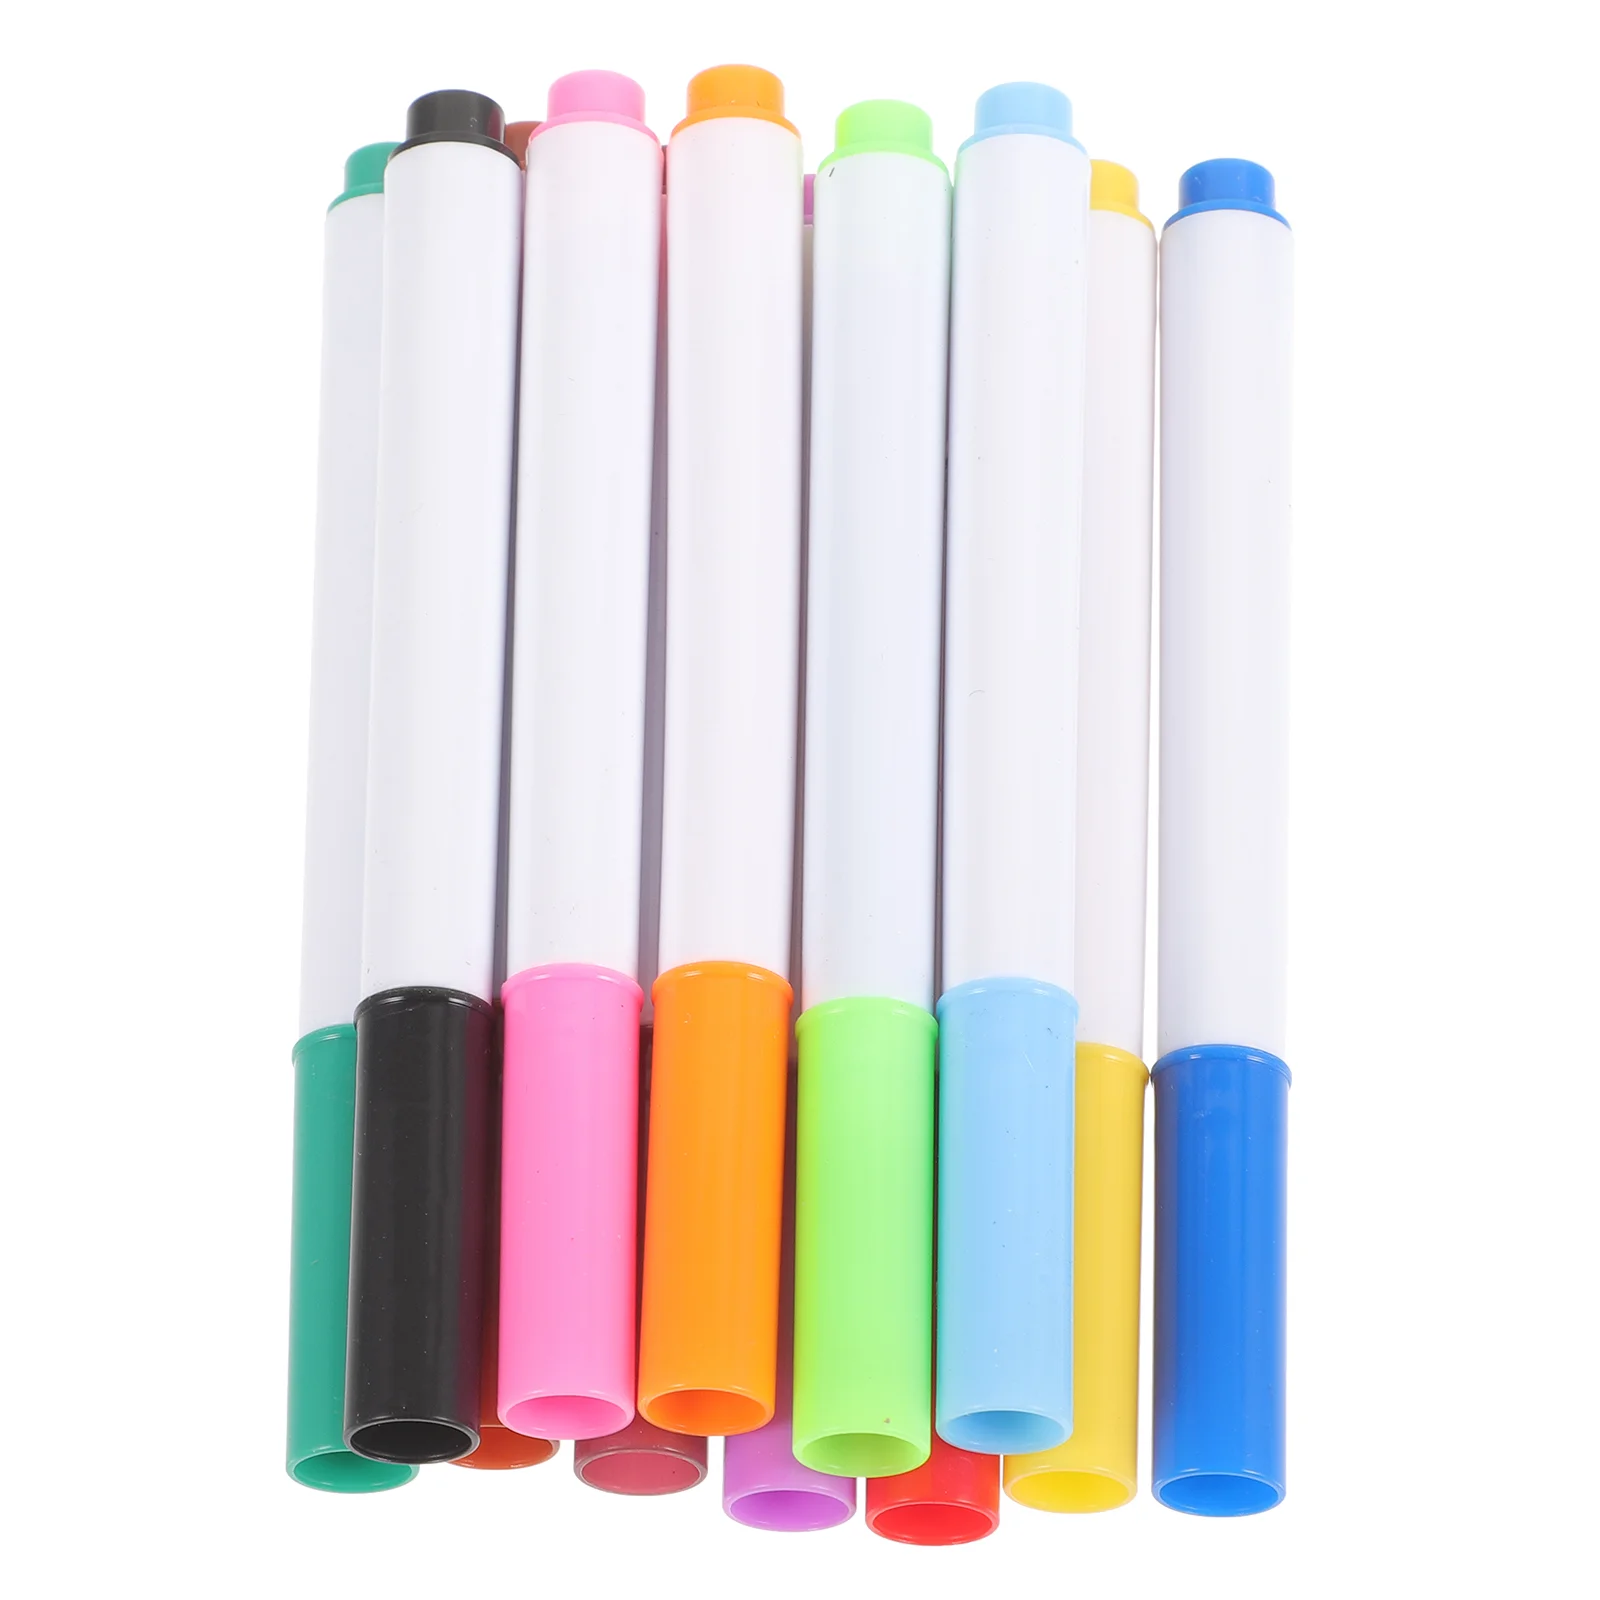 

12 Pcs Color Whiteboard Marker Pens Marking Teacher Dry Erase Markers Thin Rewritable Student Plastic Office School Classroom